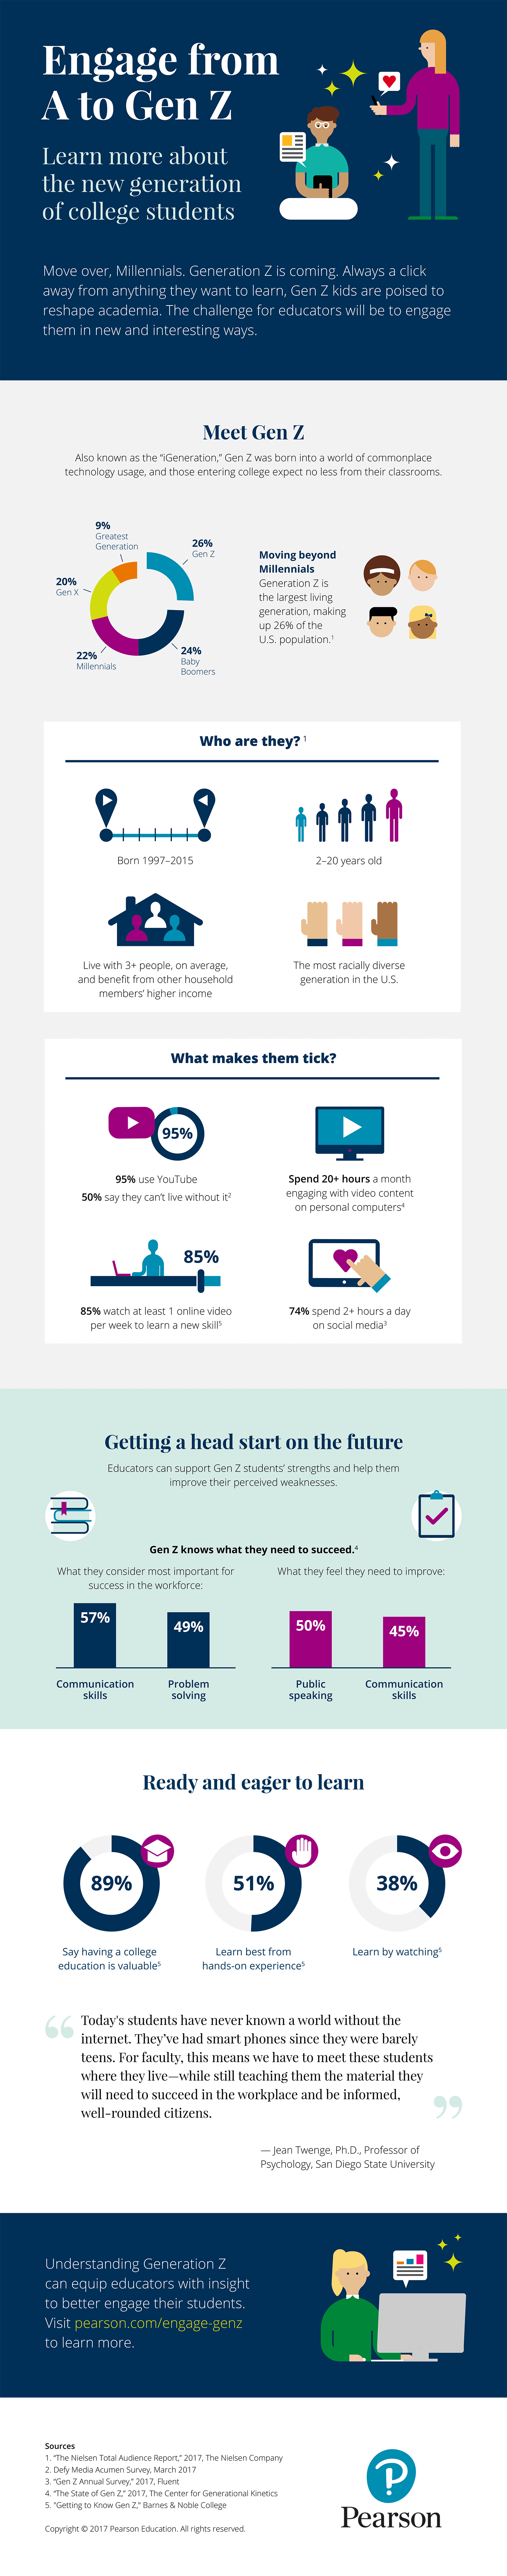 image of infographic, “Engage from A to Gen Z”